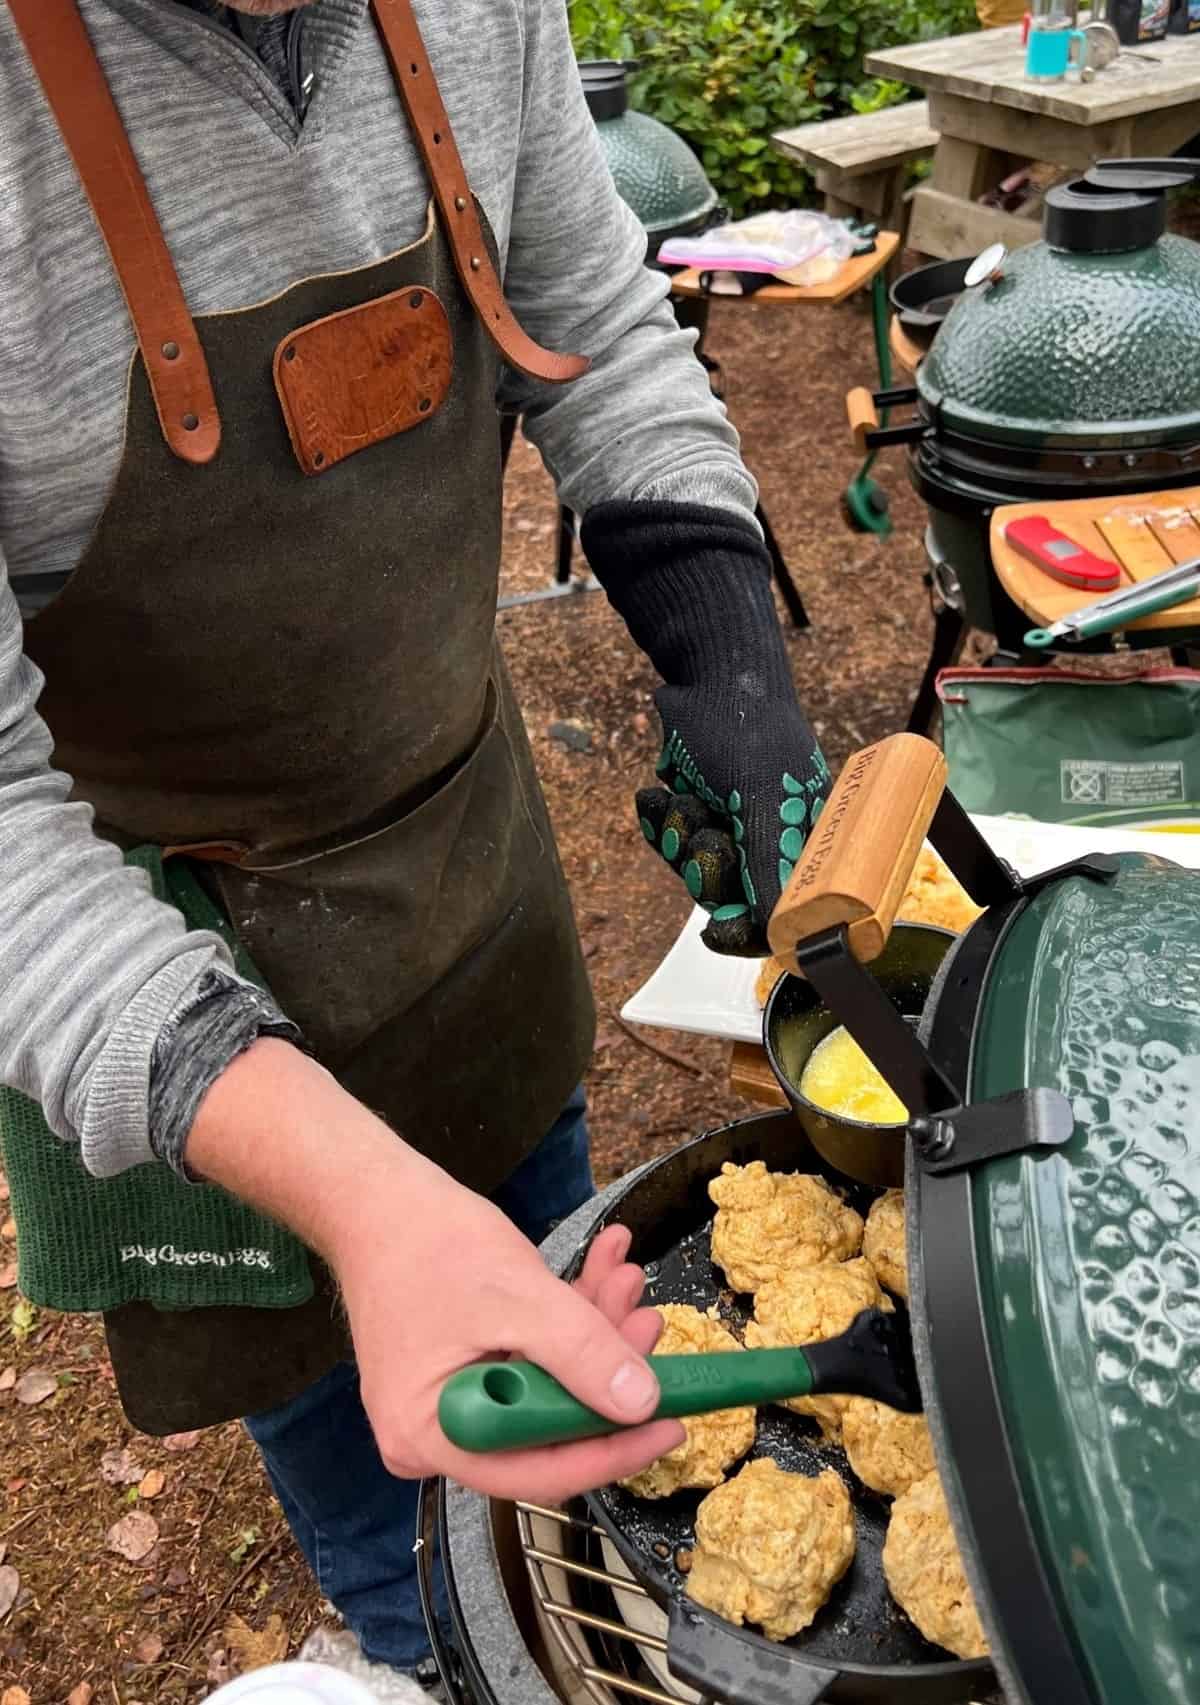 Sean Martin of Vindulge glazing drop biscuits on Big Green Egg with melted butter.